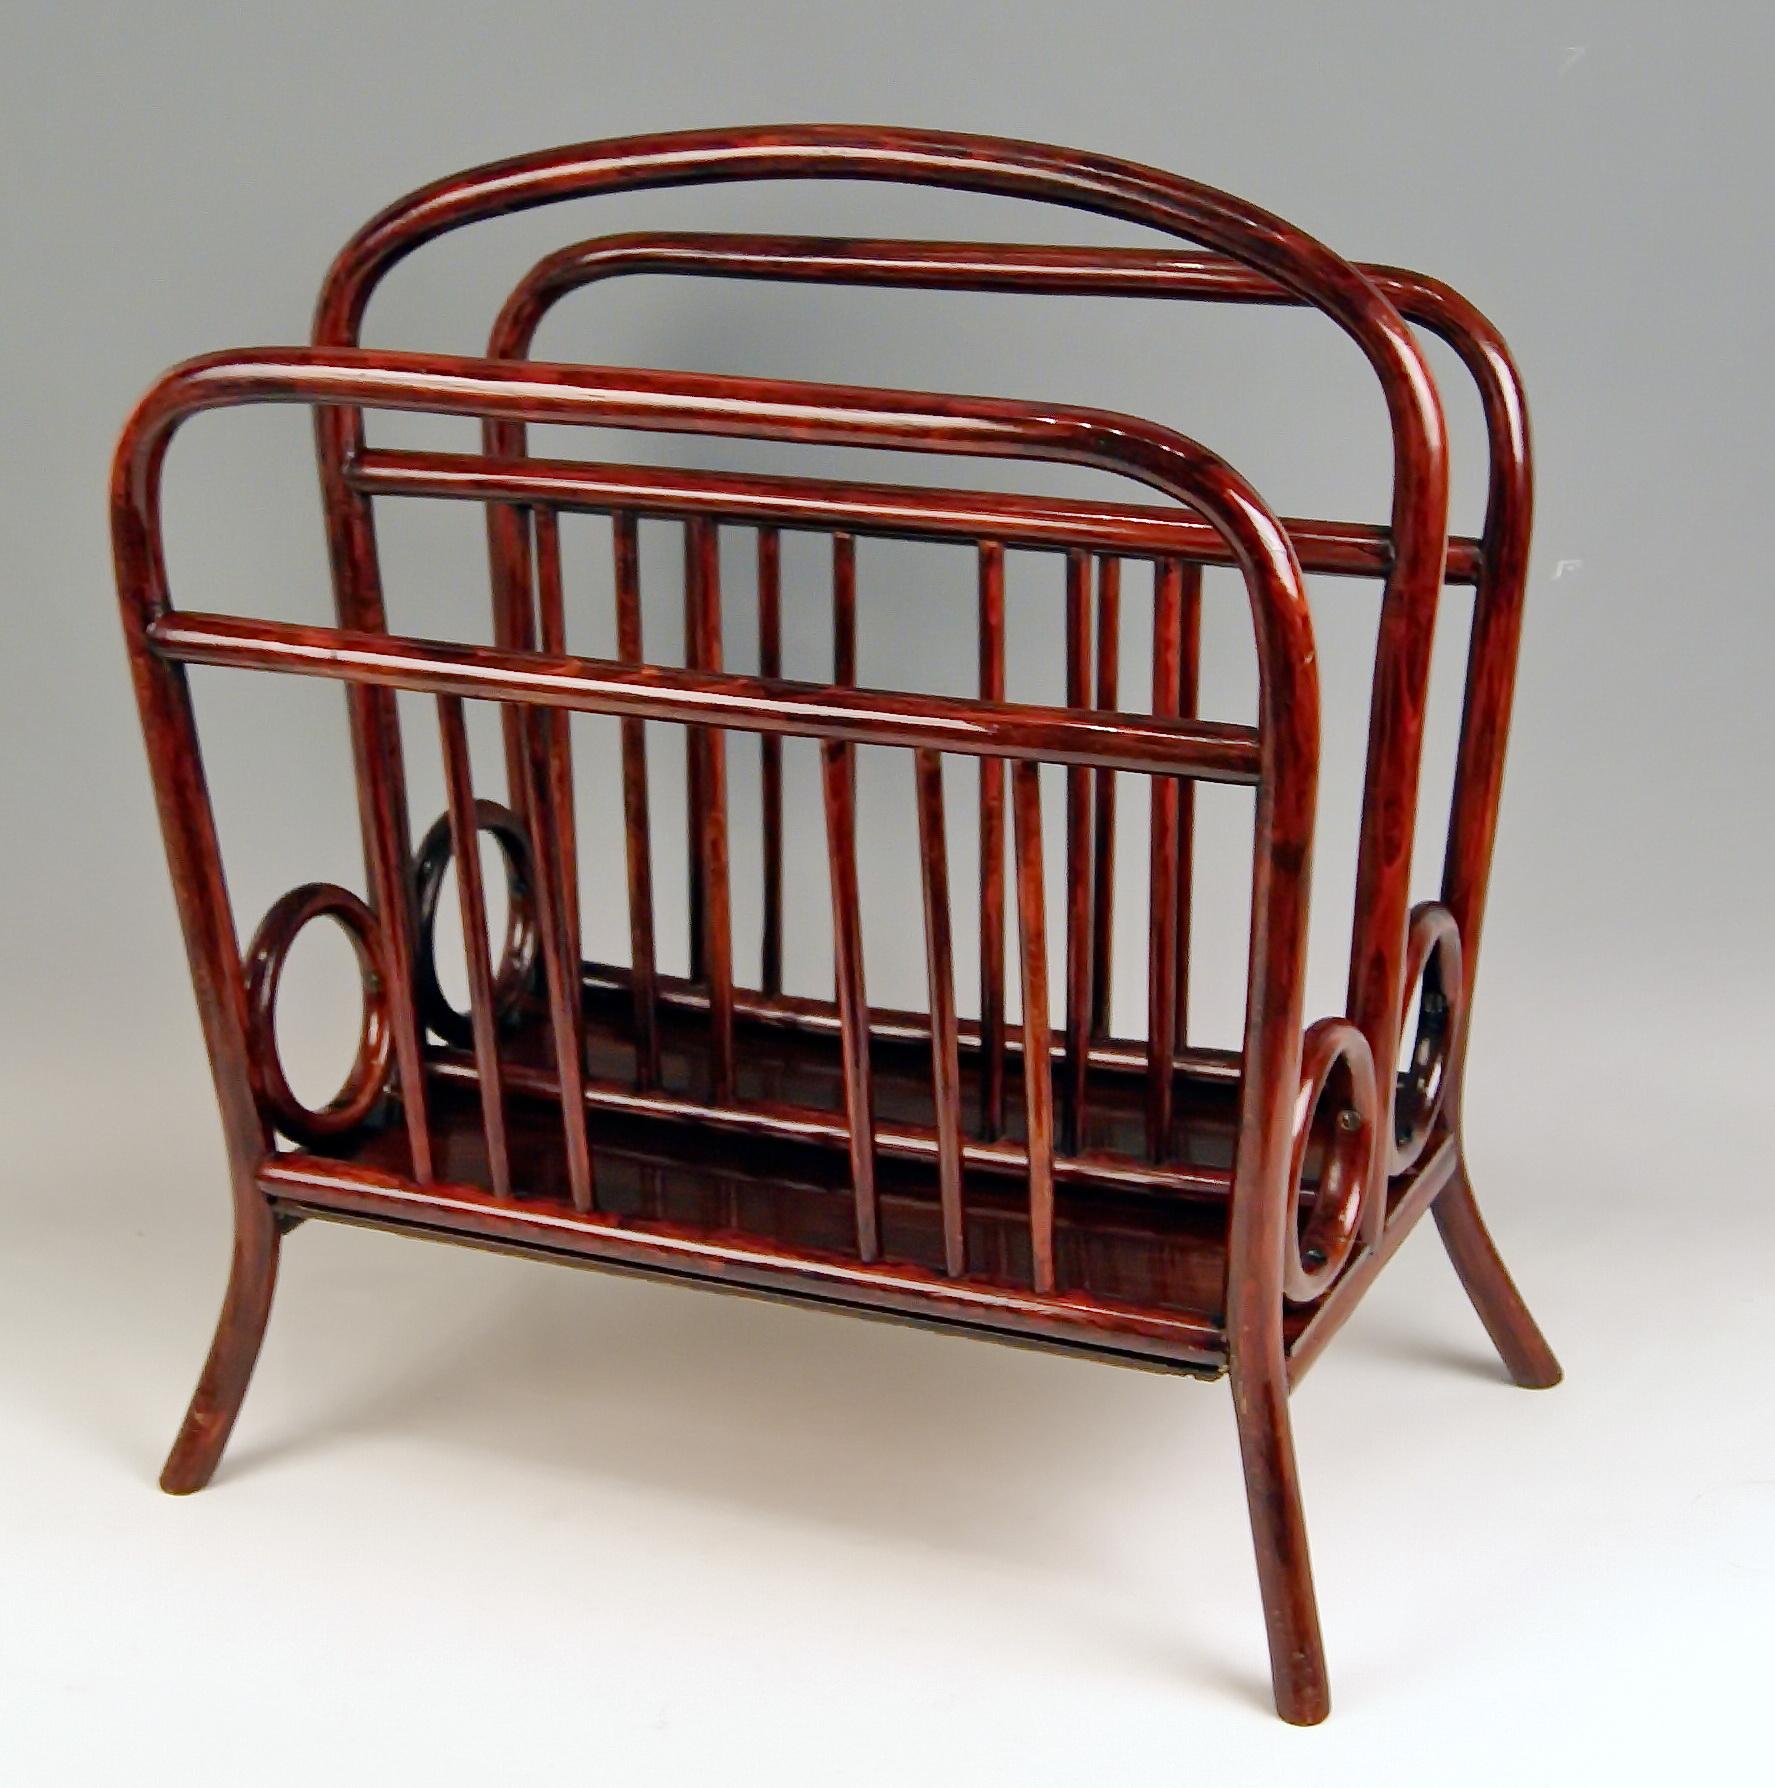 Thonet Vienna most elegant music or newspaper / magazine rack (= for holding newspapers or music sheets)

Model number 33
This model was created before the year 1904 by Austrian Manufactory Thonet Brothers. 

high quality handwork / stunningly